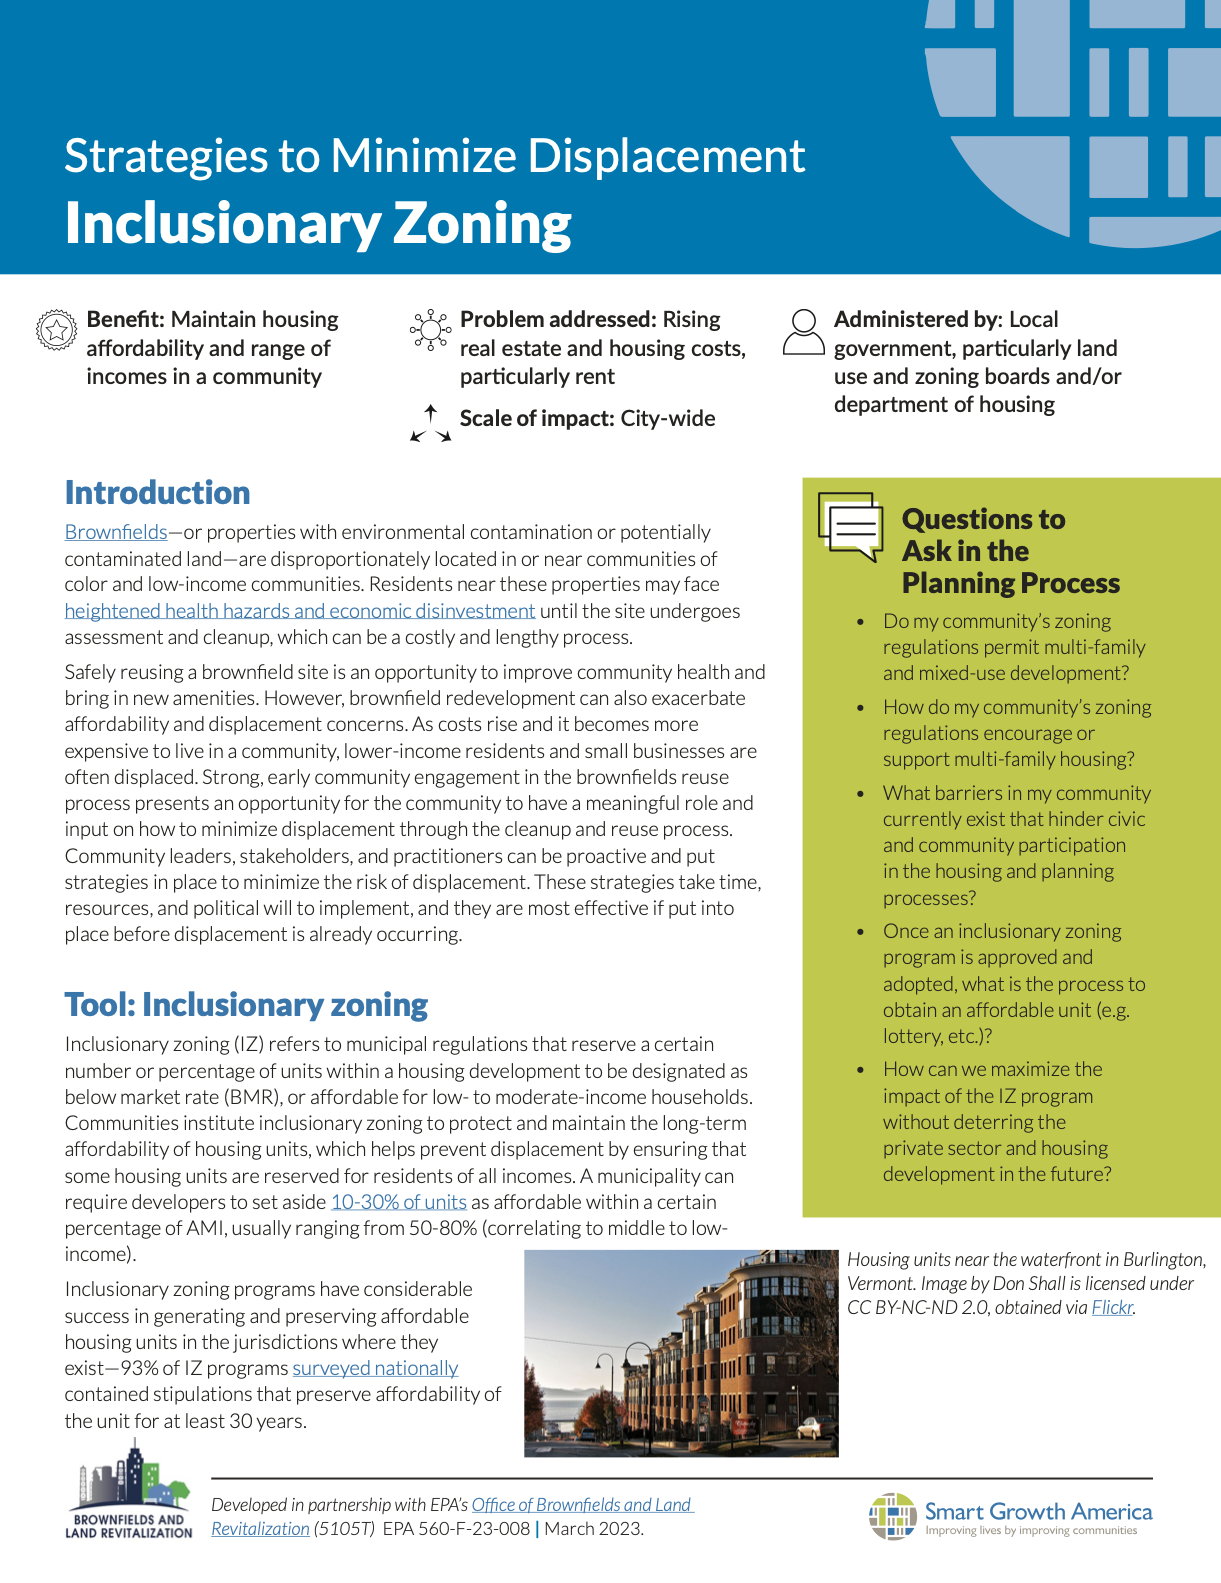 Strategies to Minimize Displacement: Inclusionary Zoning